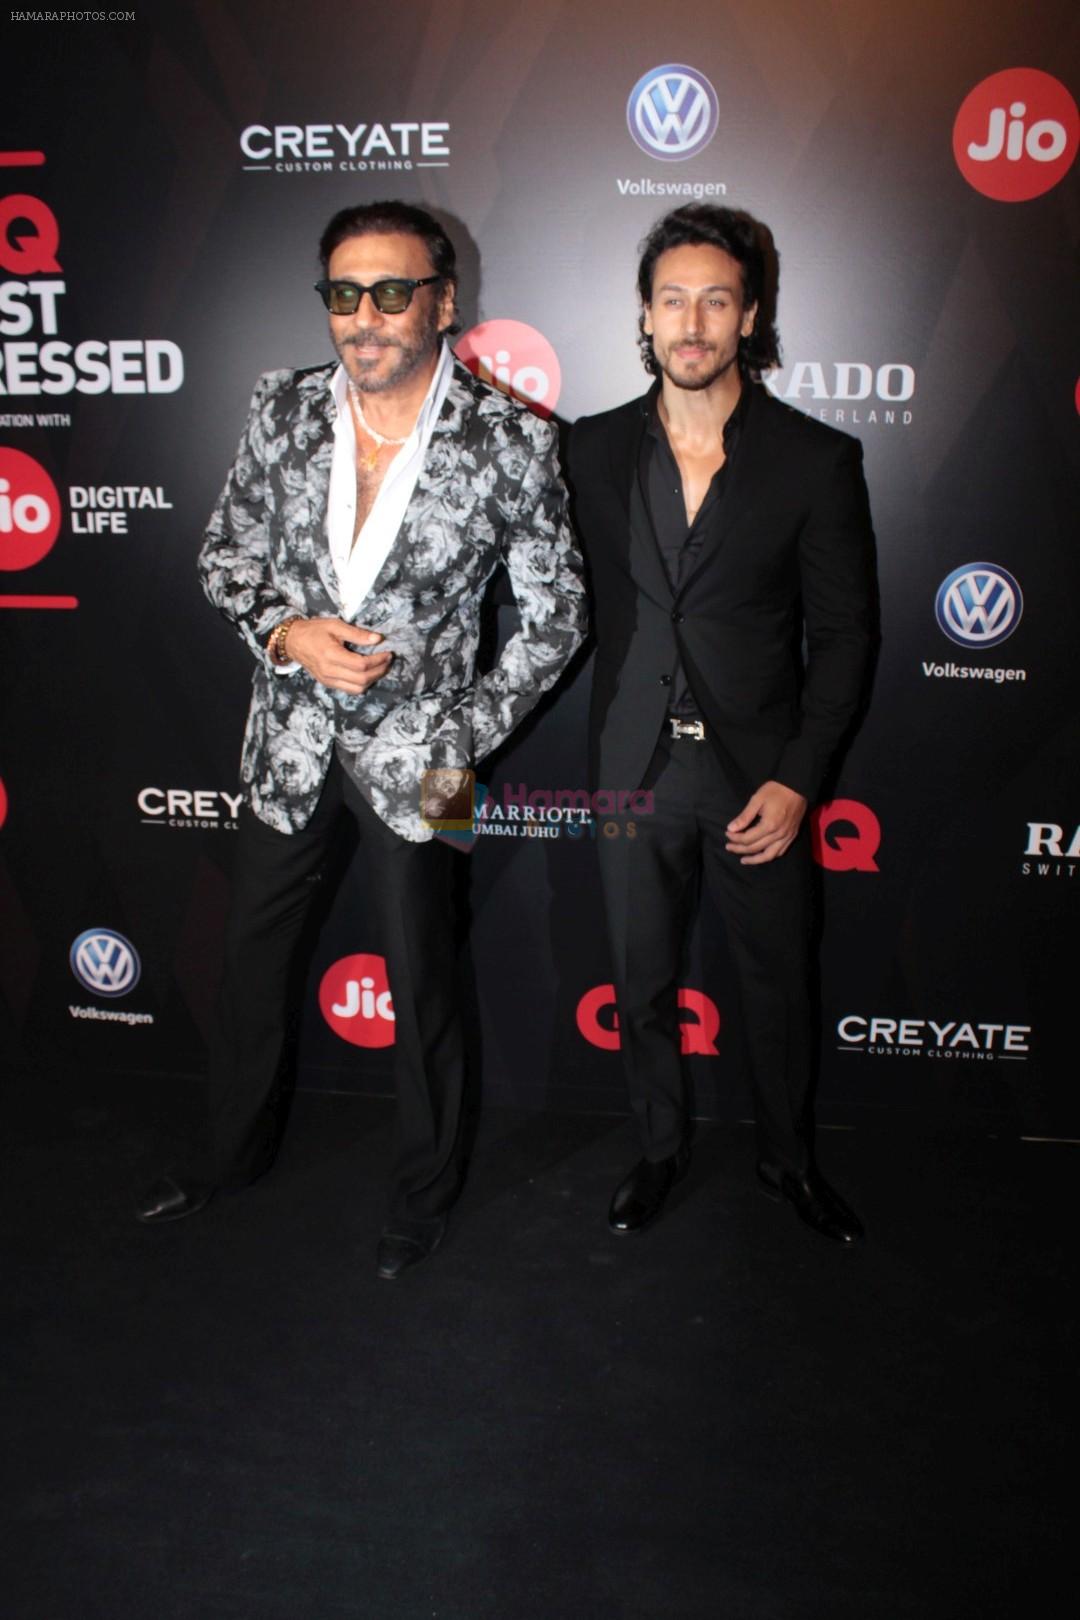 Tiger Shroff, Jackie Shroff at Star Studded Red Carpet For GQ Best Dressed 2017 on 4th June 2017